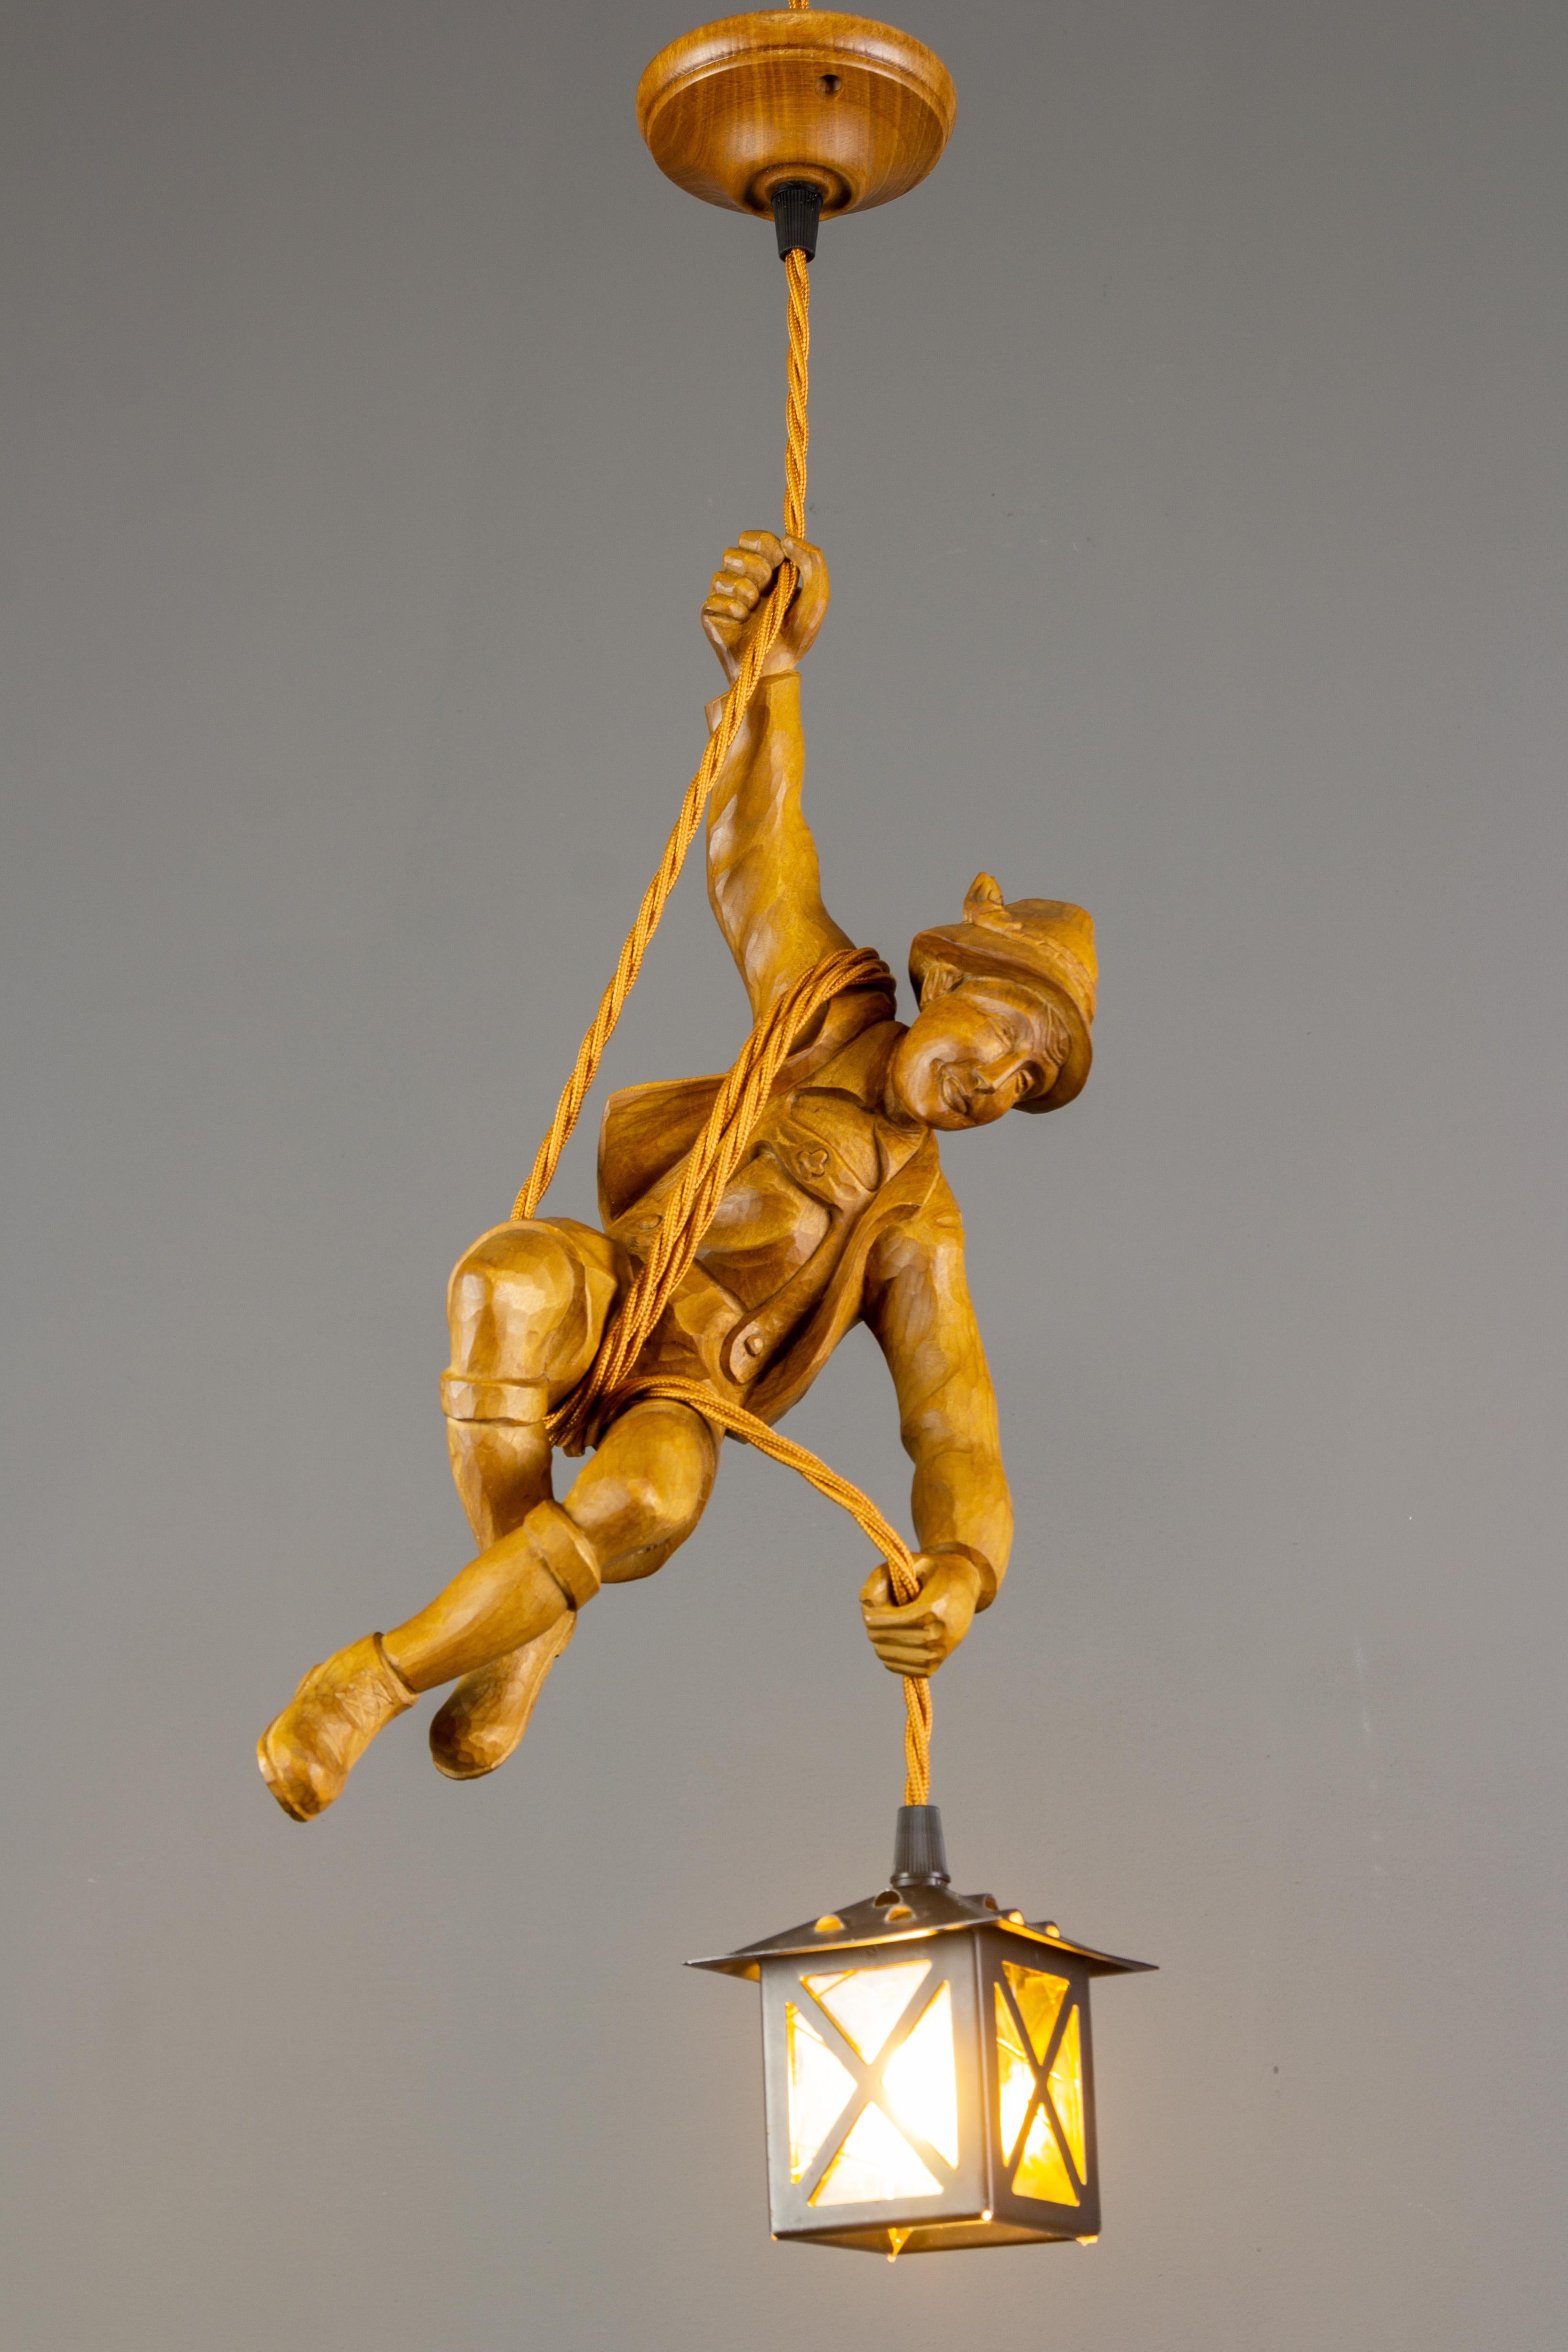 Mid-20th Century German Pendant Light Hand Carved Wooden Figure Mountain Climber with Lantern